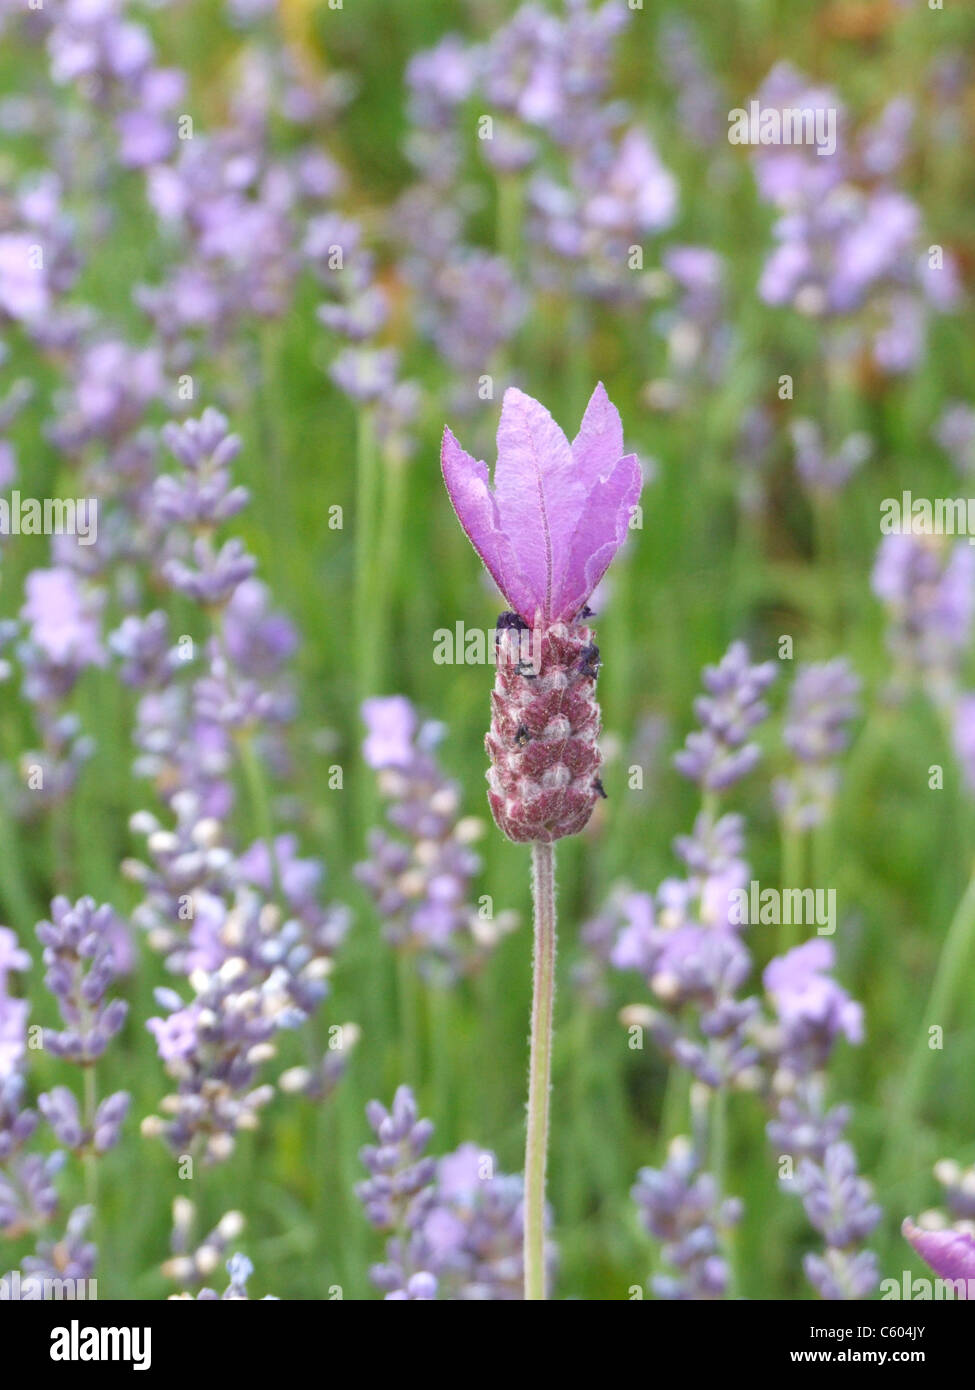 flowers of the lavender plant Stock Photo